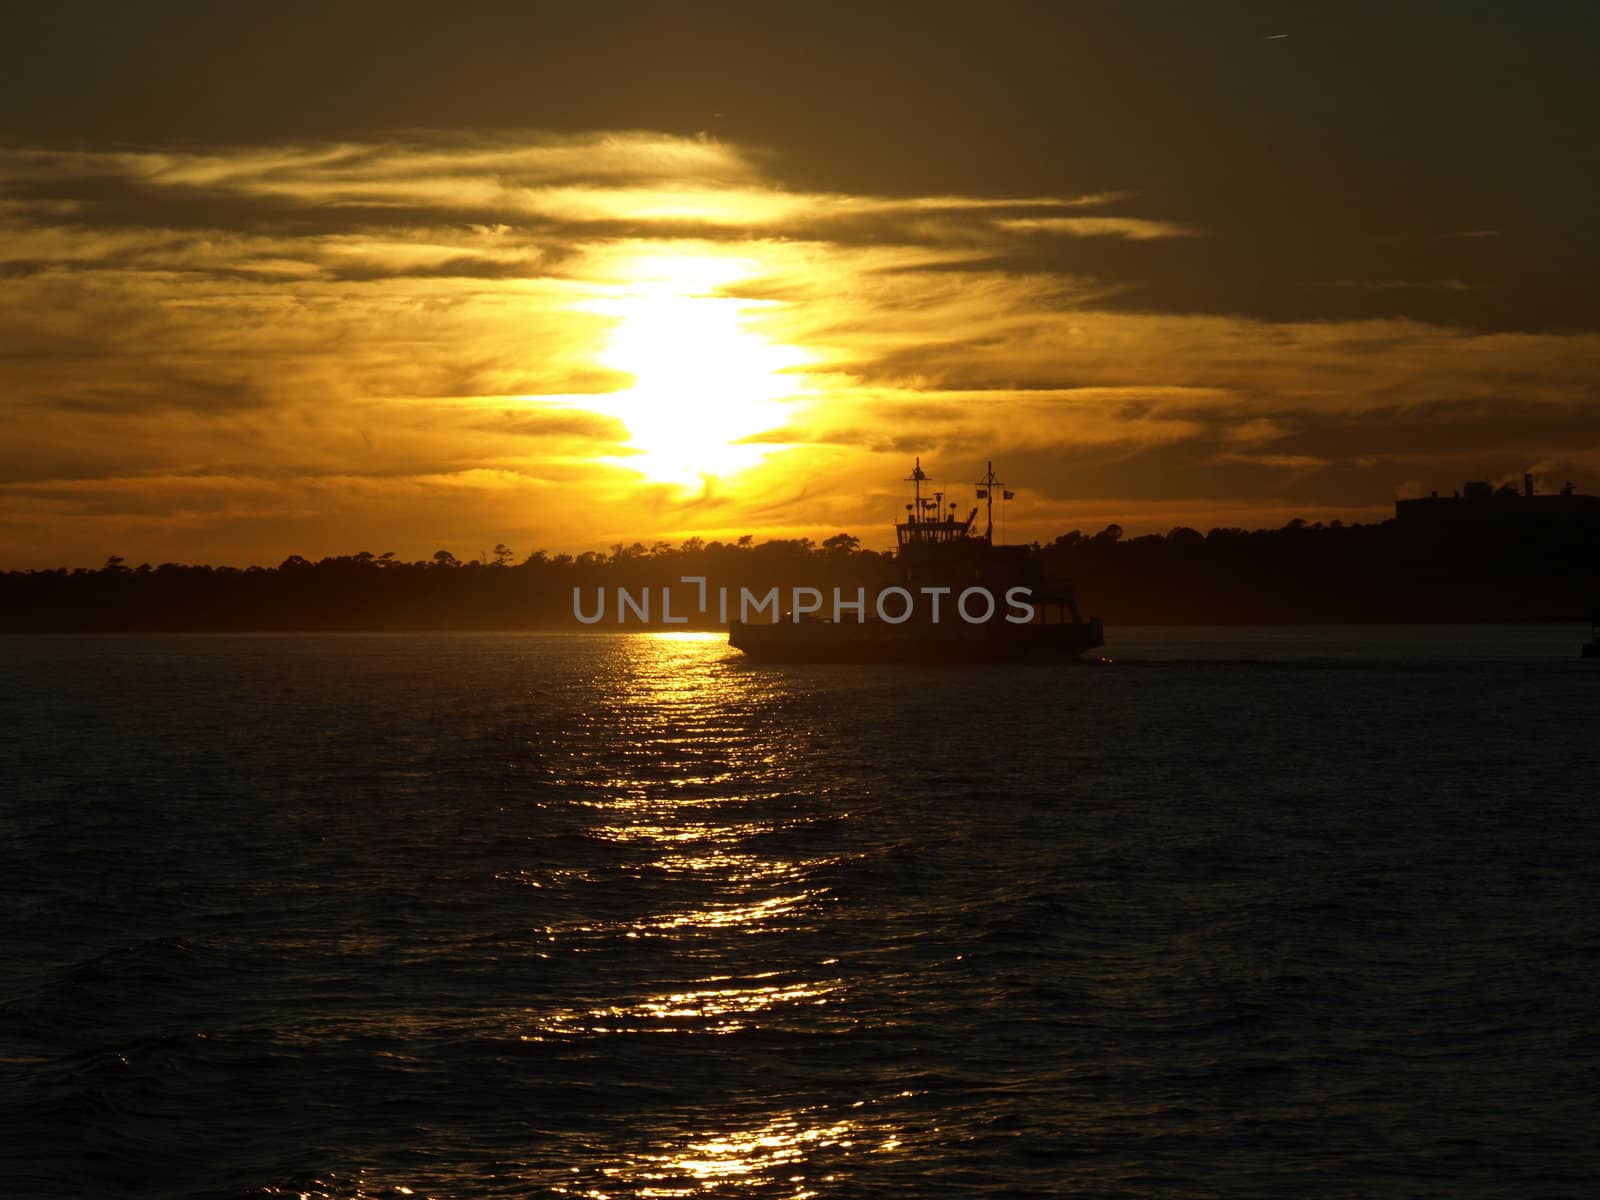 A ferry boat crosses the water against the setting sun